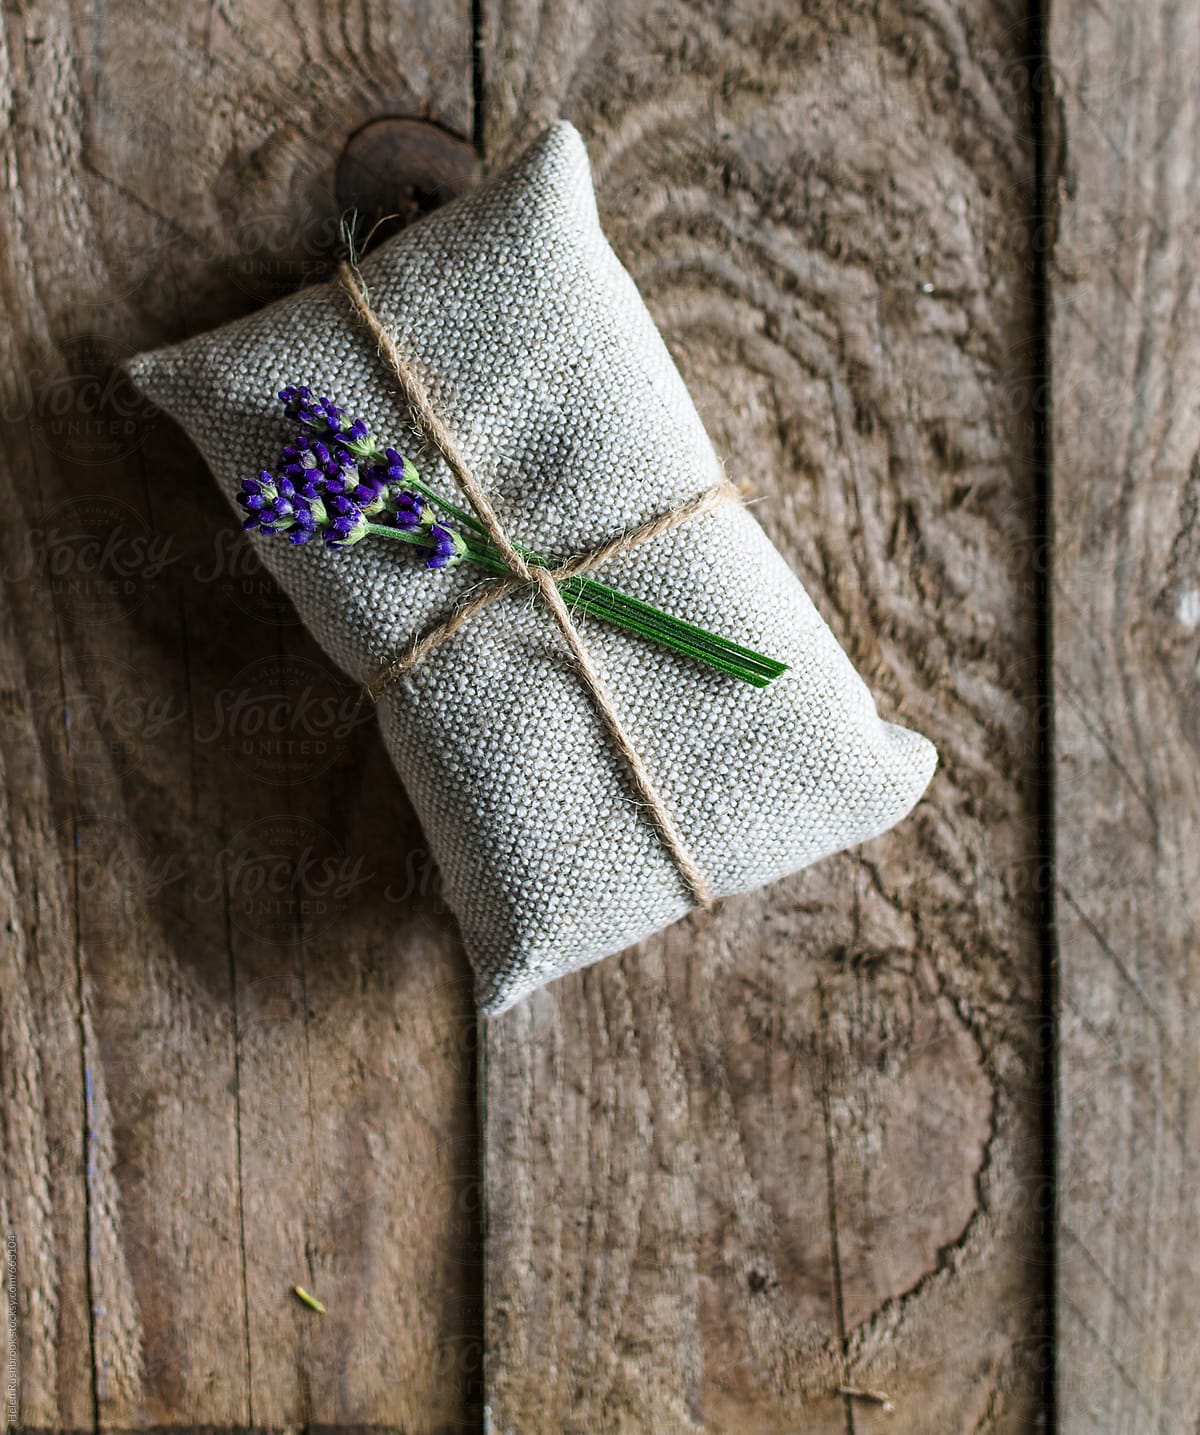 An object wrapped in natural materials with lavender